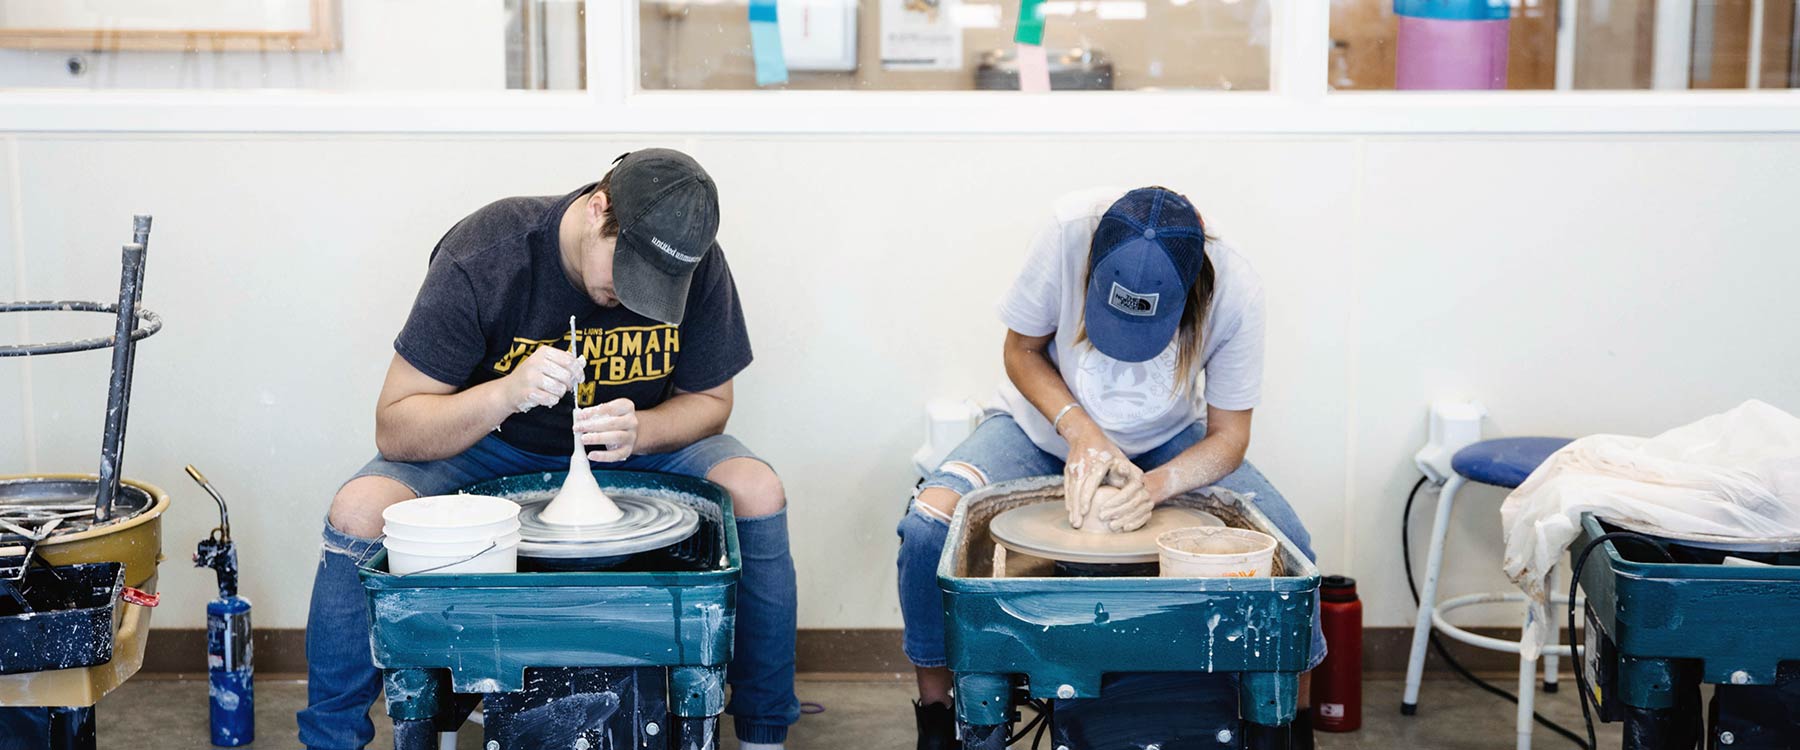 Two students seated at pottery wheels, shaping clay in a workshop. Both wear casual clothing and baseball caps.